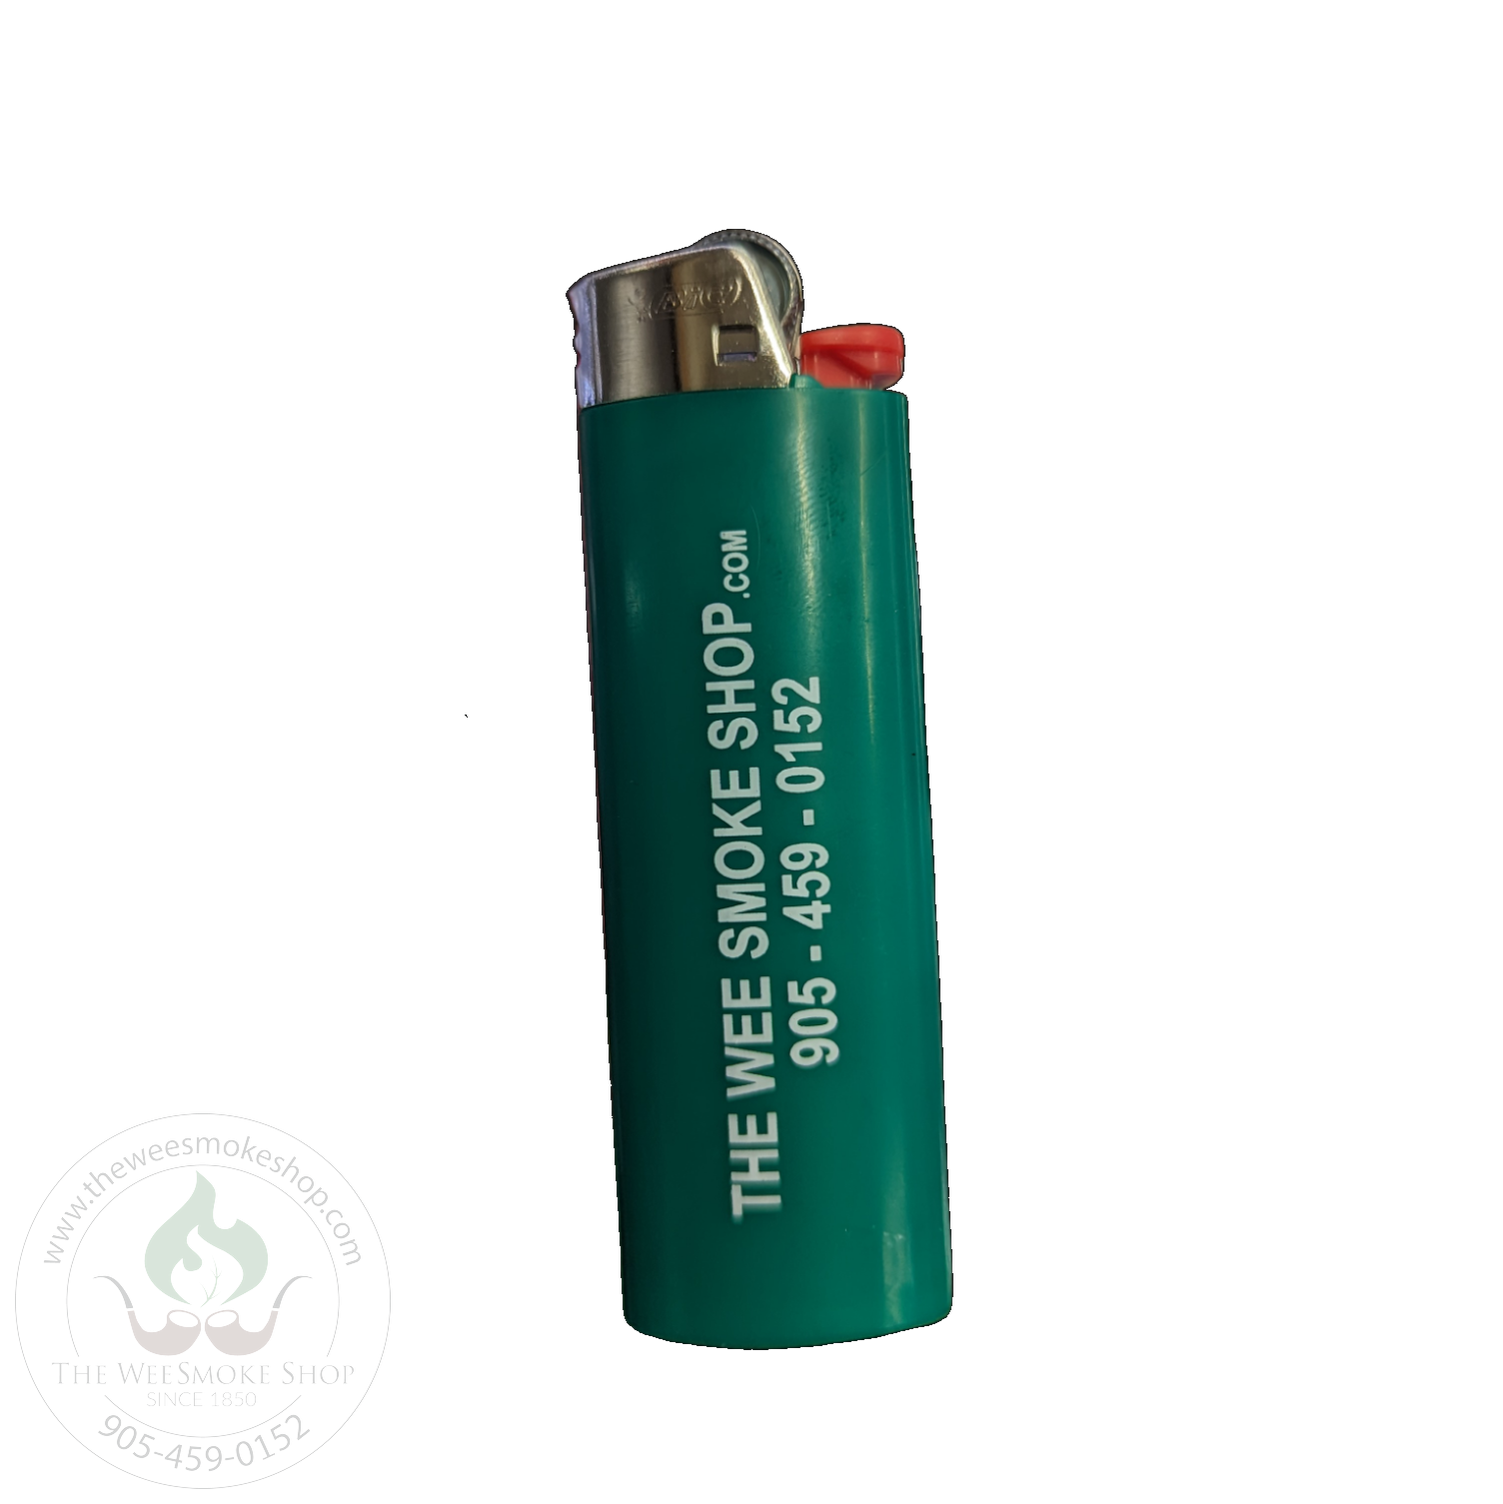 Green Bic Lighter with company name and number - Wee Smoke Shop